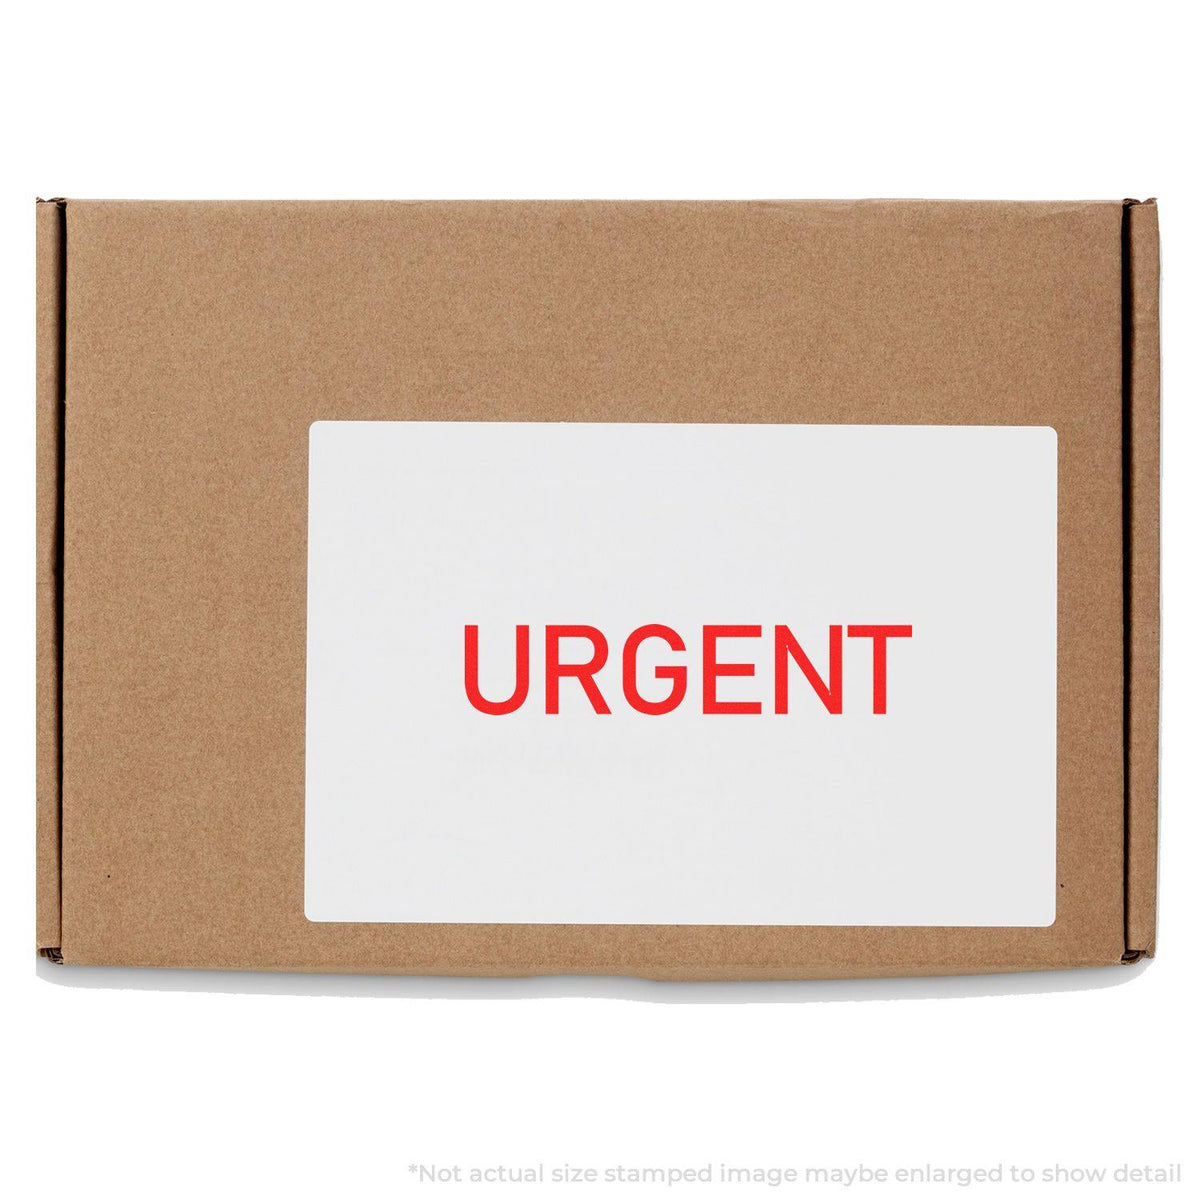 In Use Large Narrow Font Urgent Rubber Stamp Image